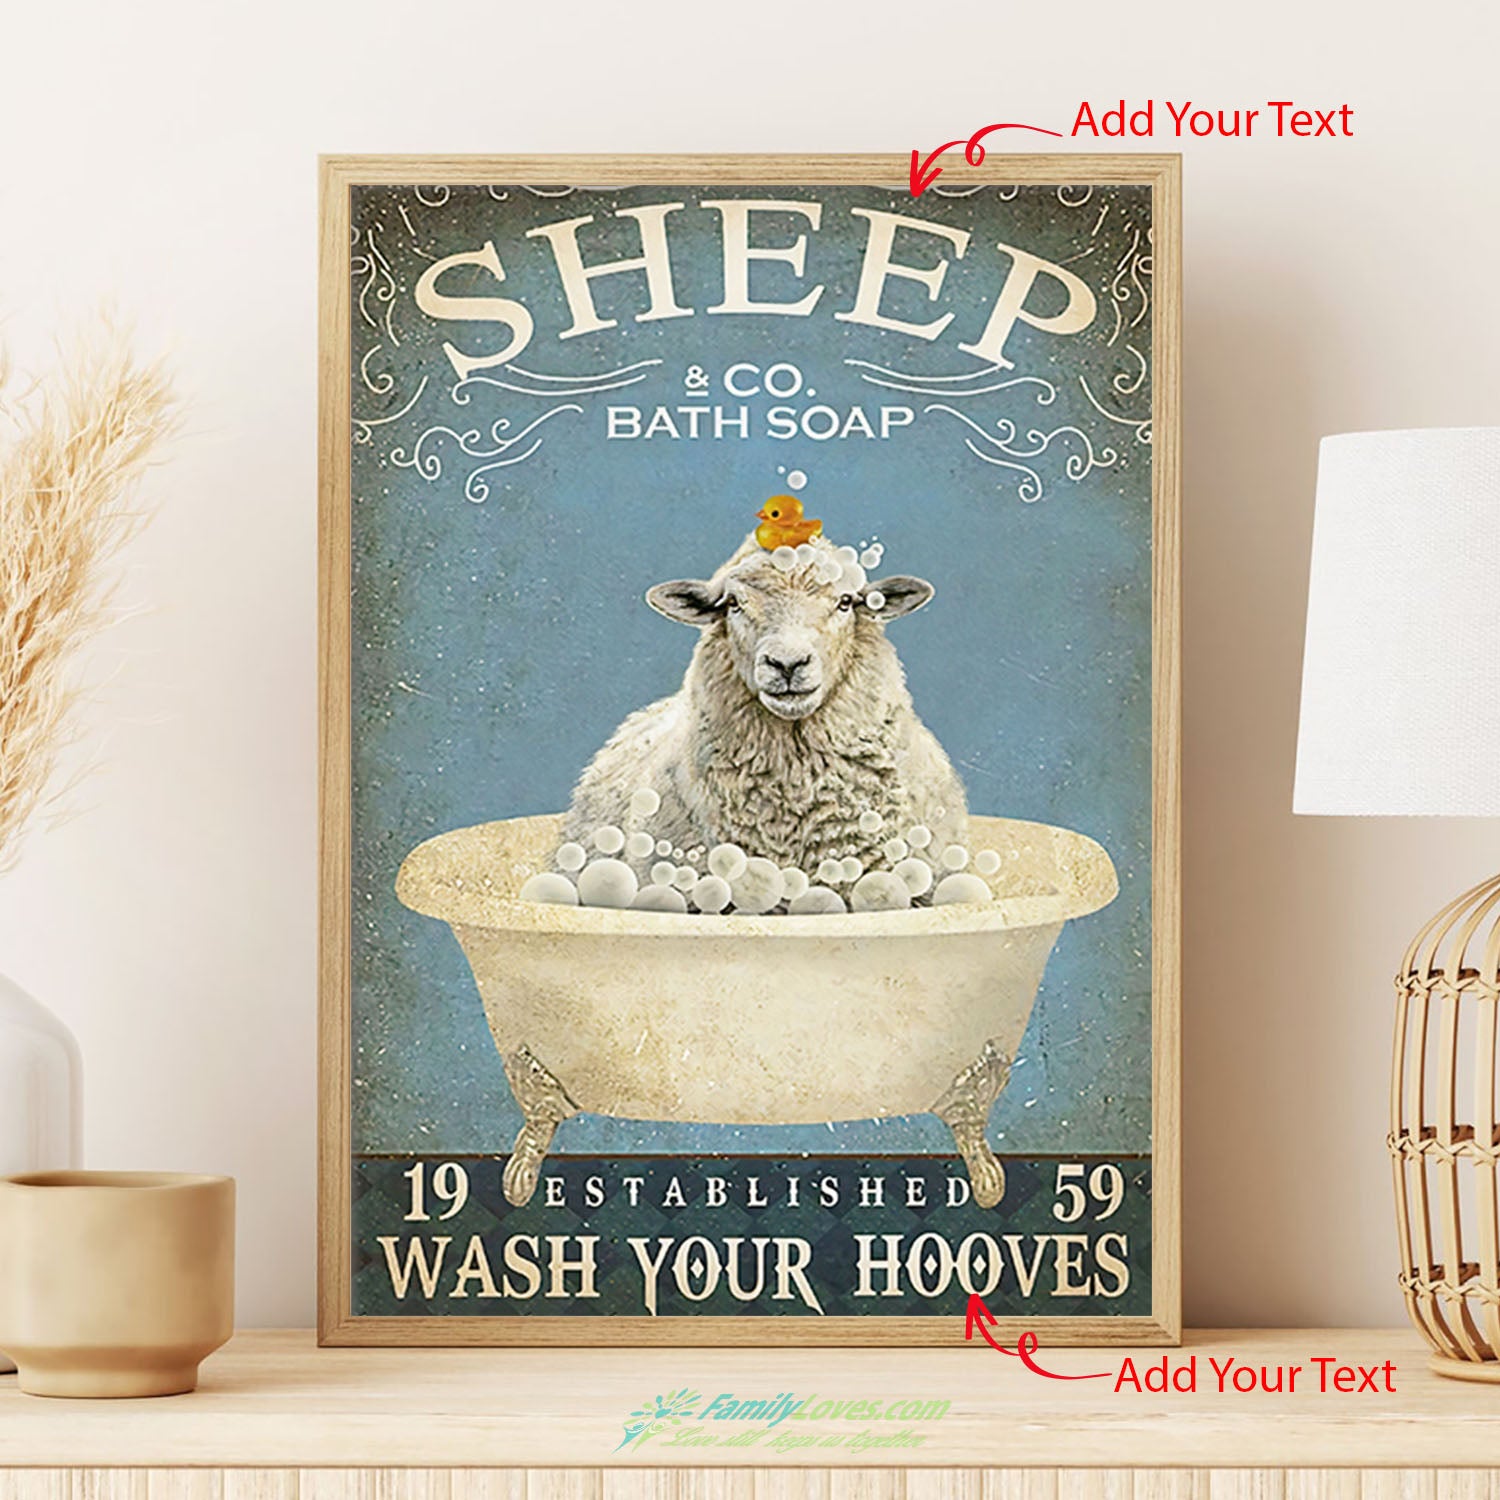 Sheep Co Bath Soap Canvas Paint Poster 36X24 All Size 1